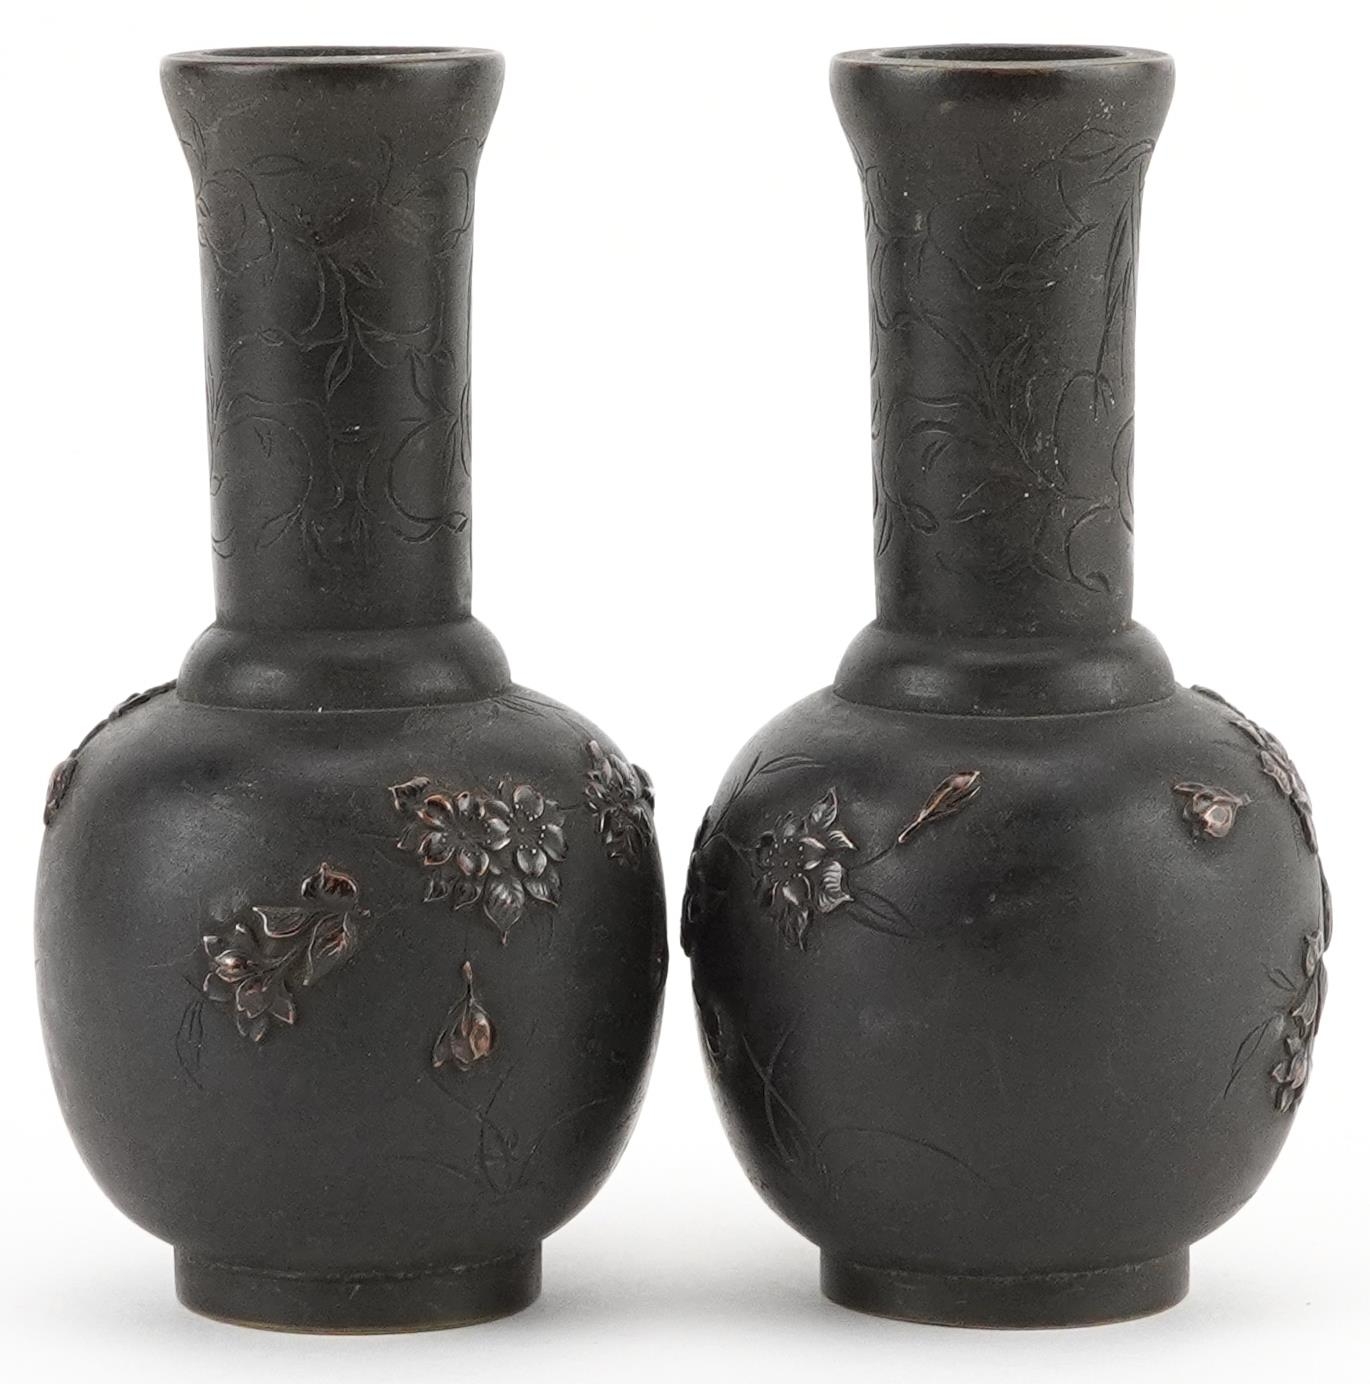 Pair of Japanese bronze vases cast in relief with birds of paradise amongst flowers, each 12cm high - Image 3 of 6